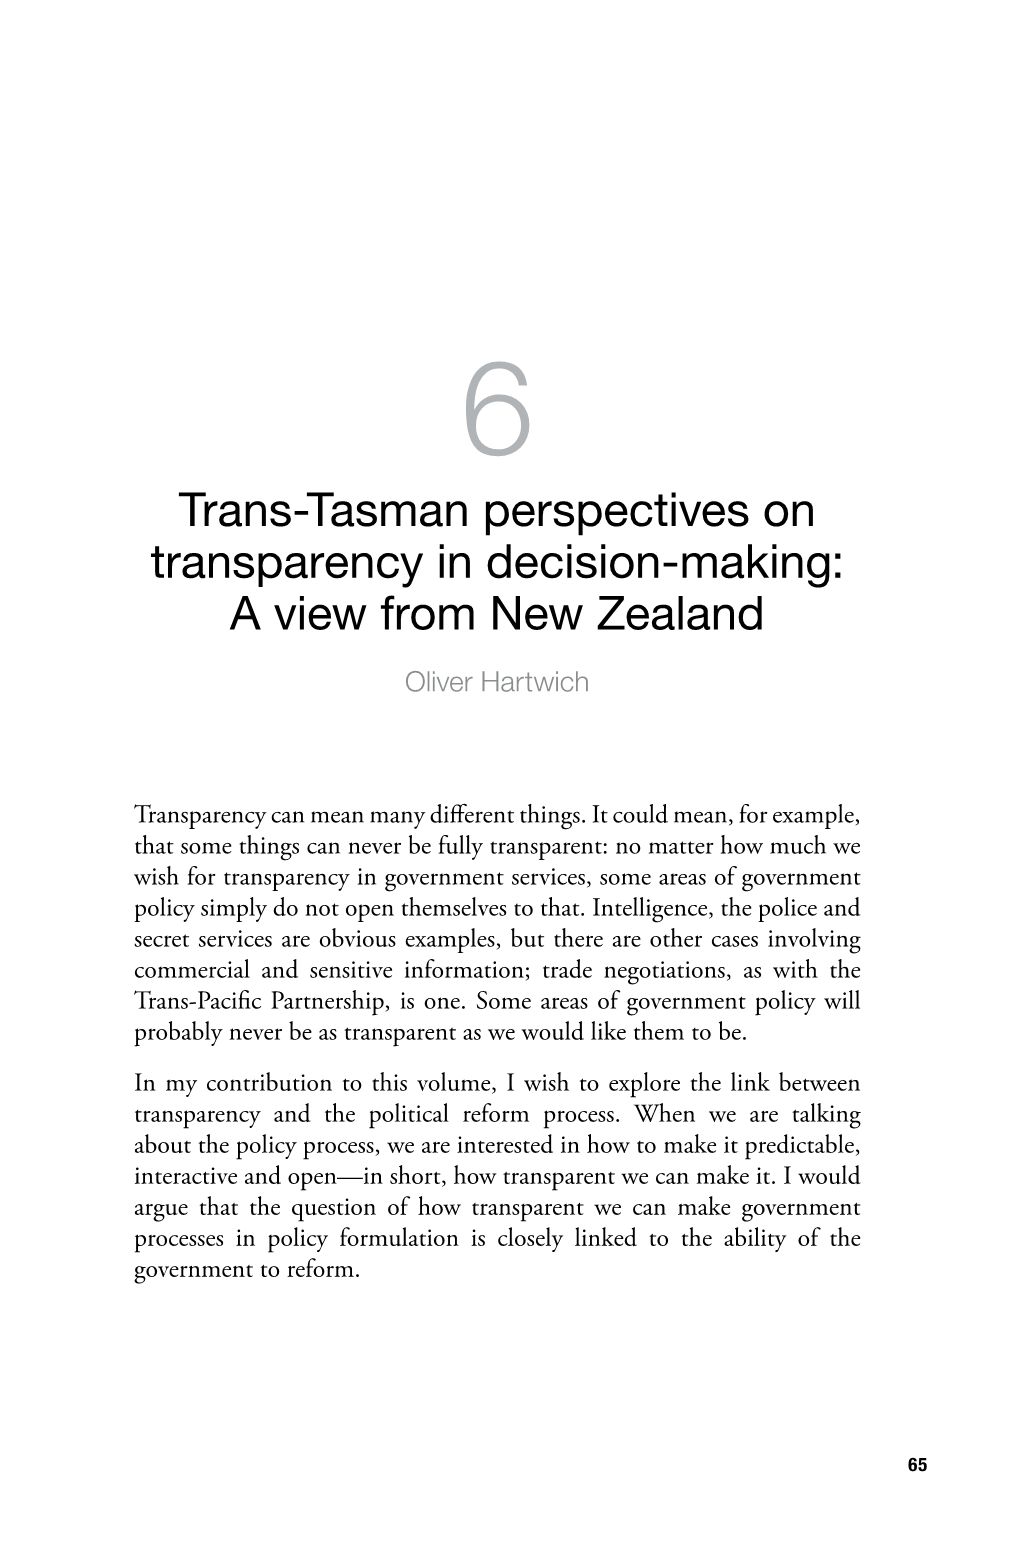 Trans-Tasman Perspectives on Transparency in Decision-Making: a View from New Zealand Oliver Hartwich